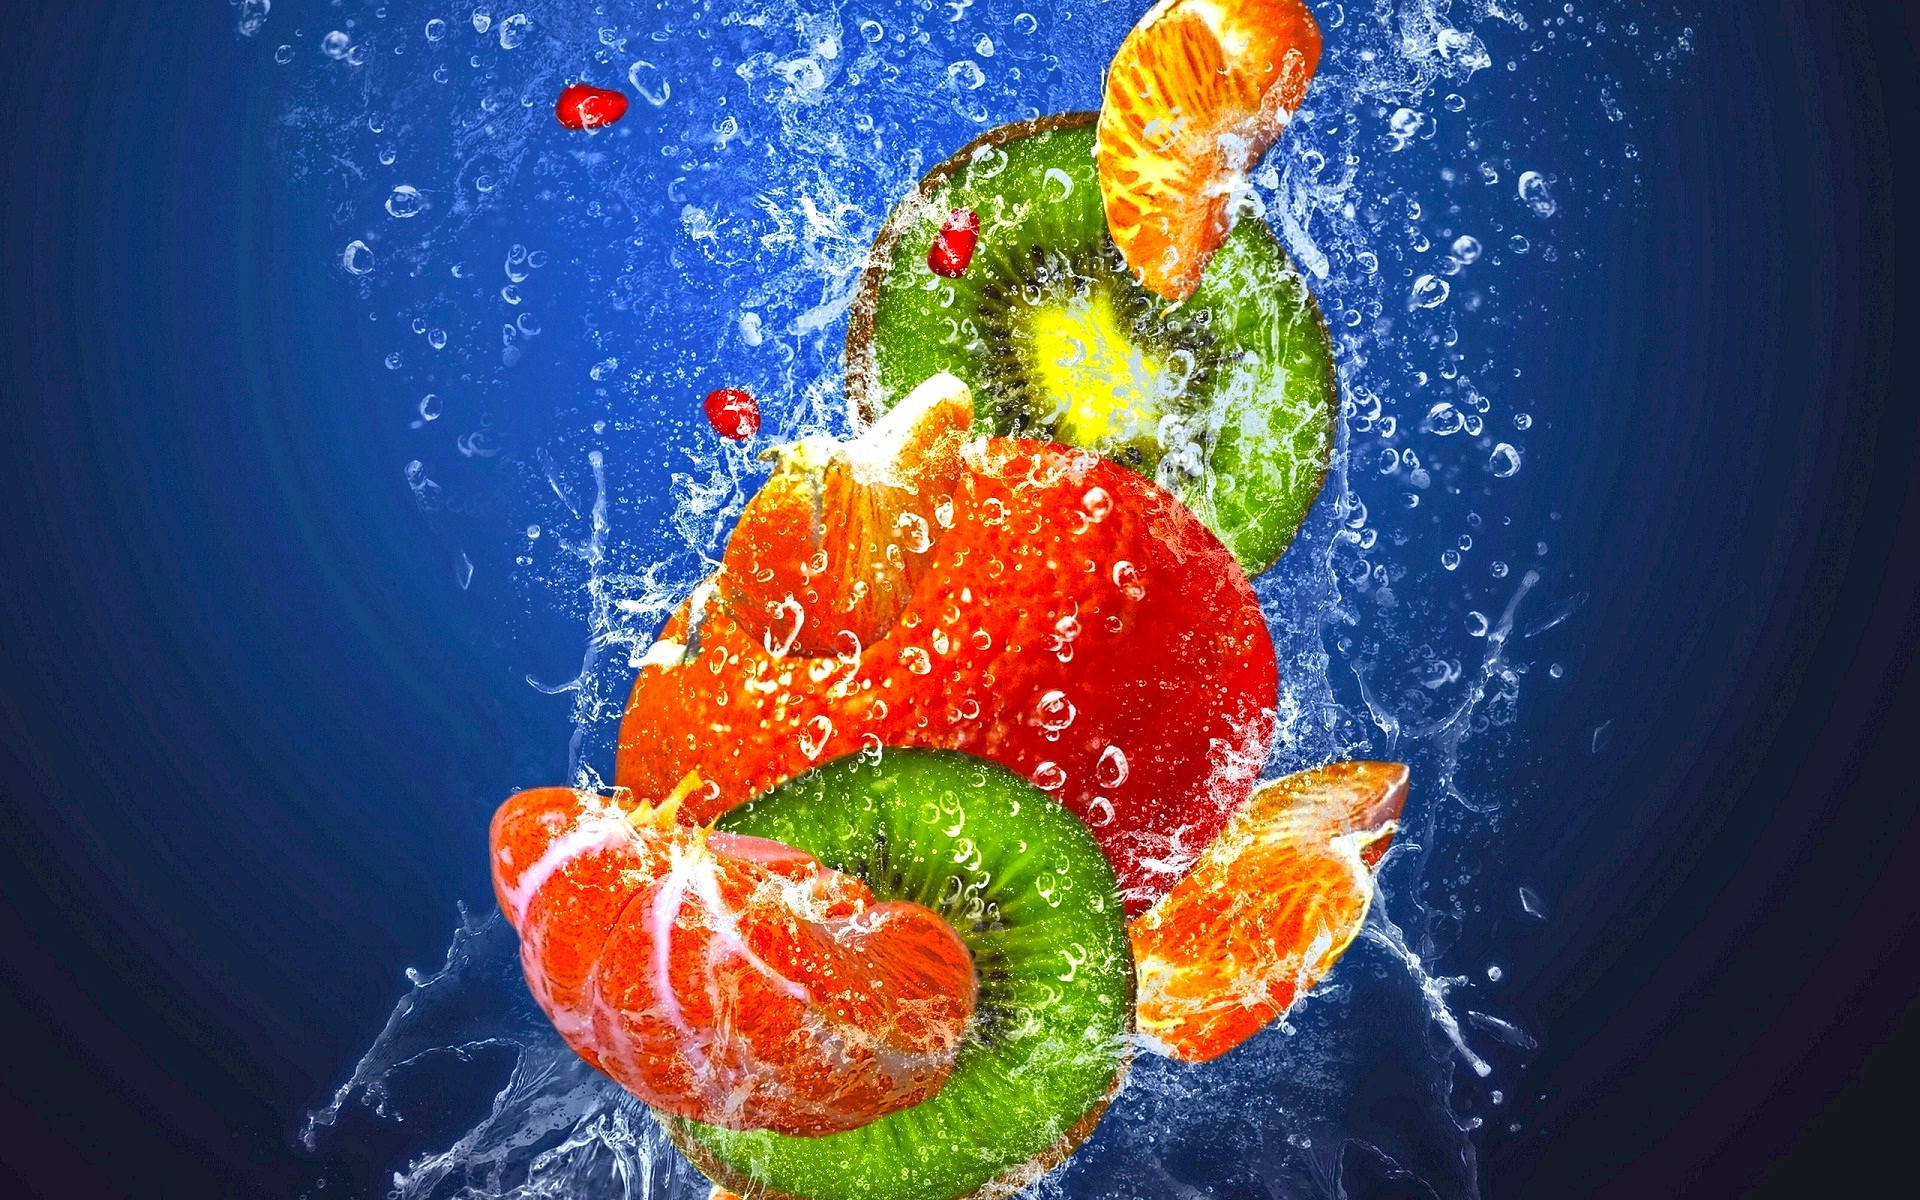 Fruits Falling In The Water Wallpaper